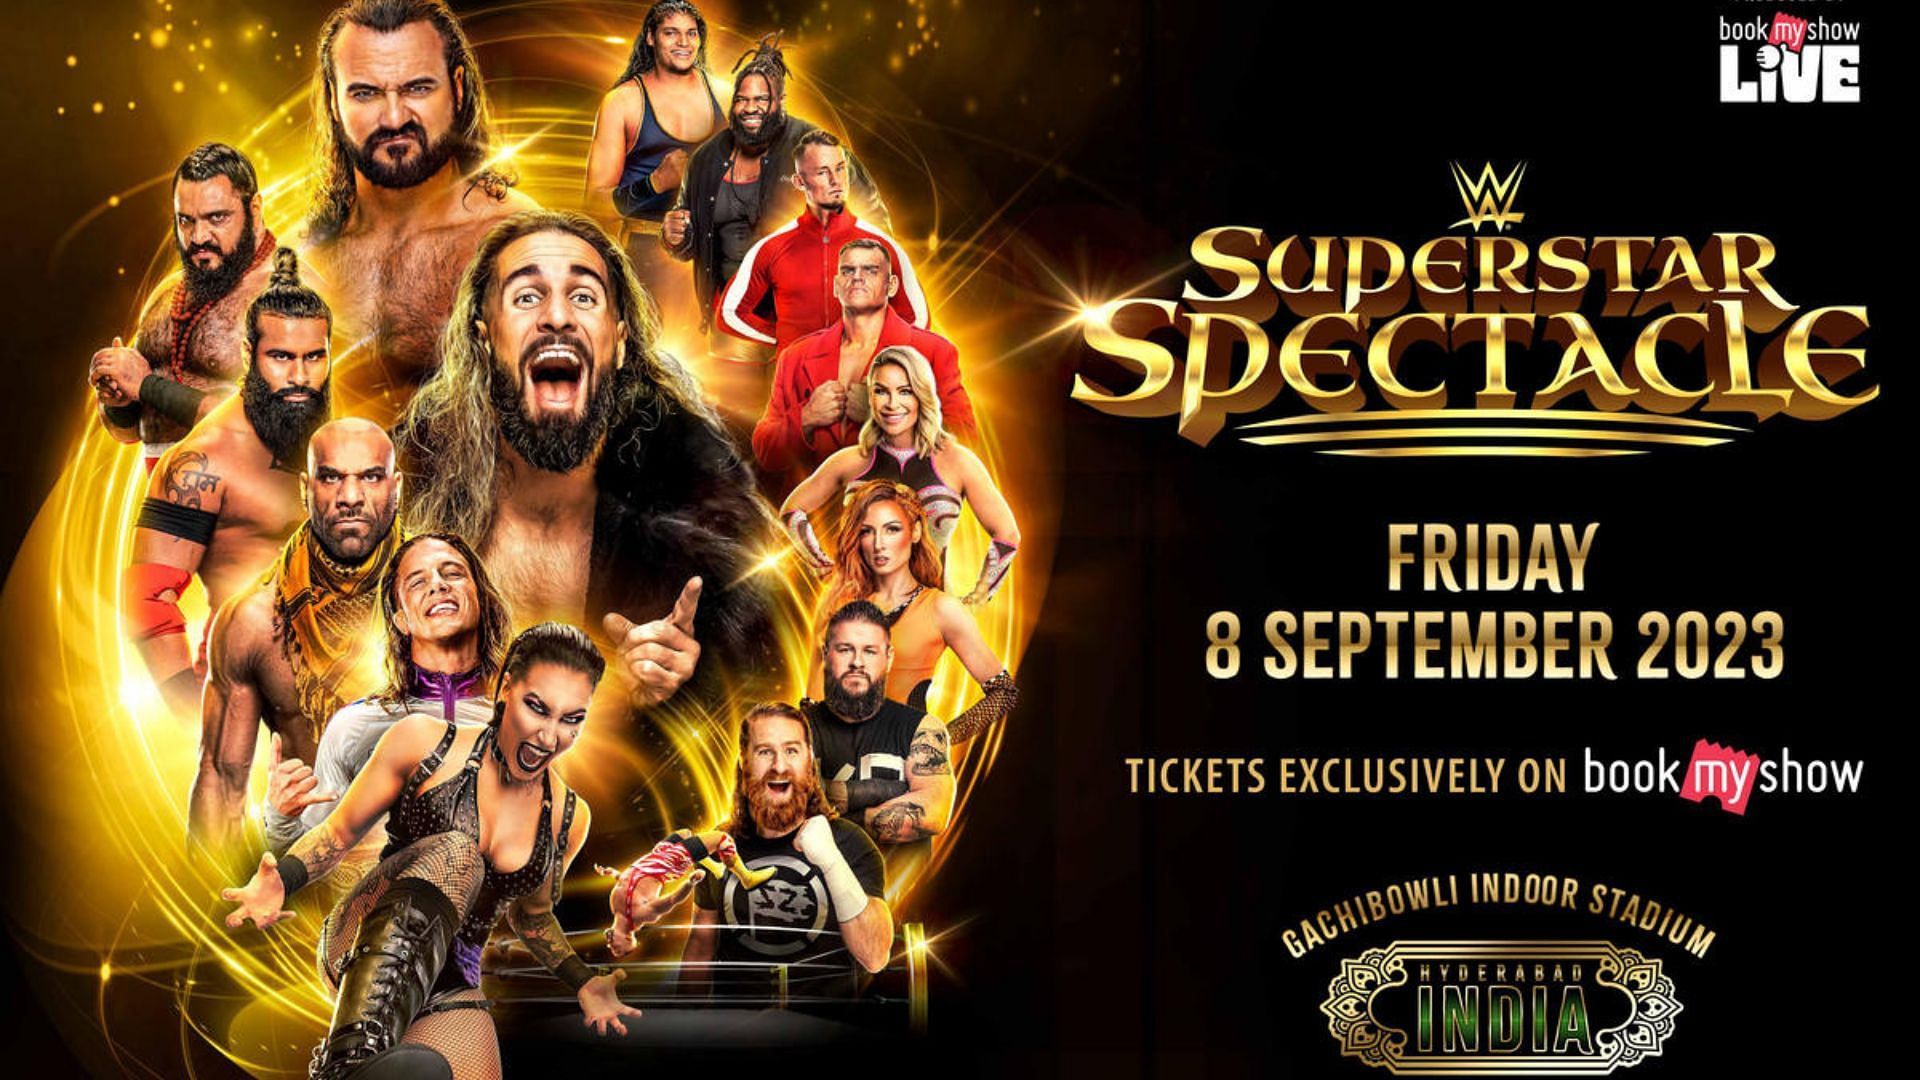 Superstar Spectacle will take place on September 8th.